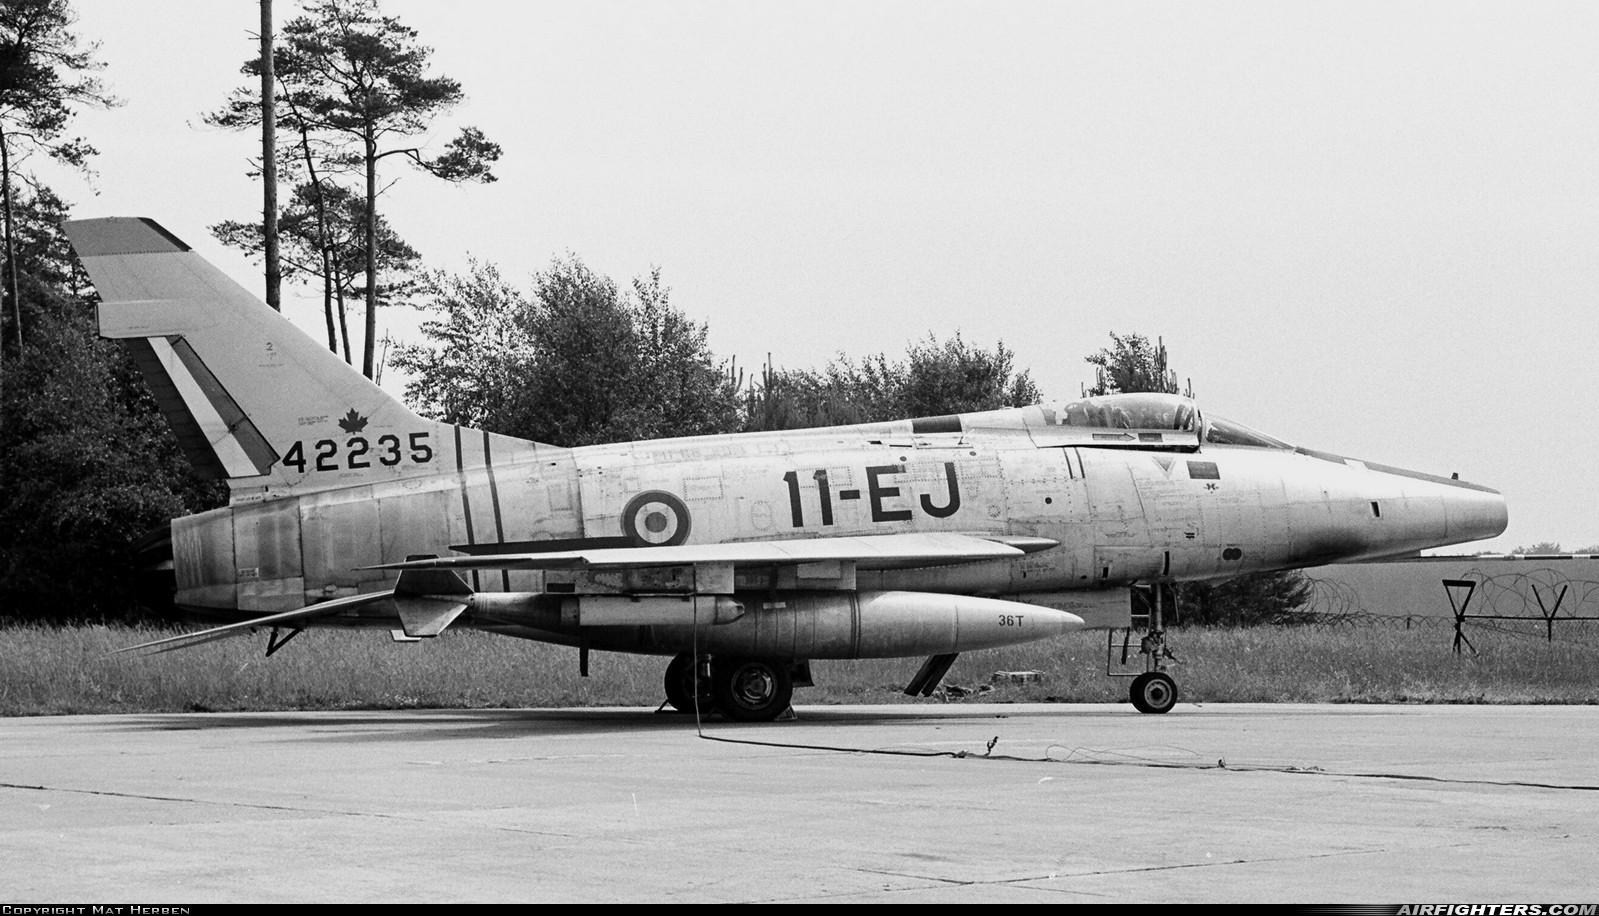 France - Air Force North American F-100D Super Sabre 42235 at Toul - Rosieres (LFSL), France